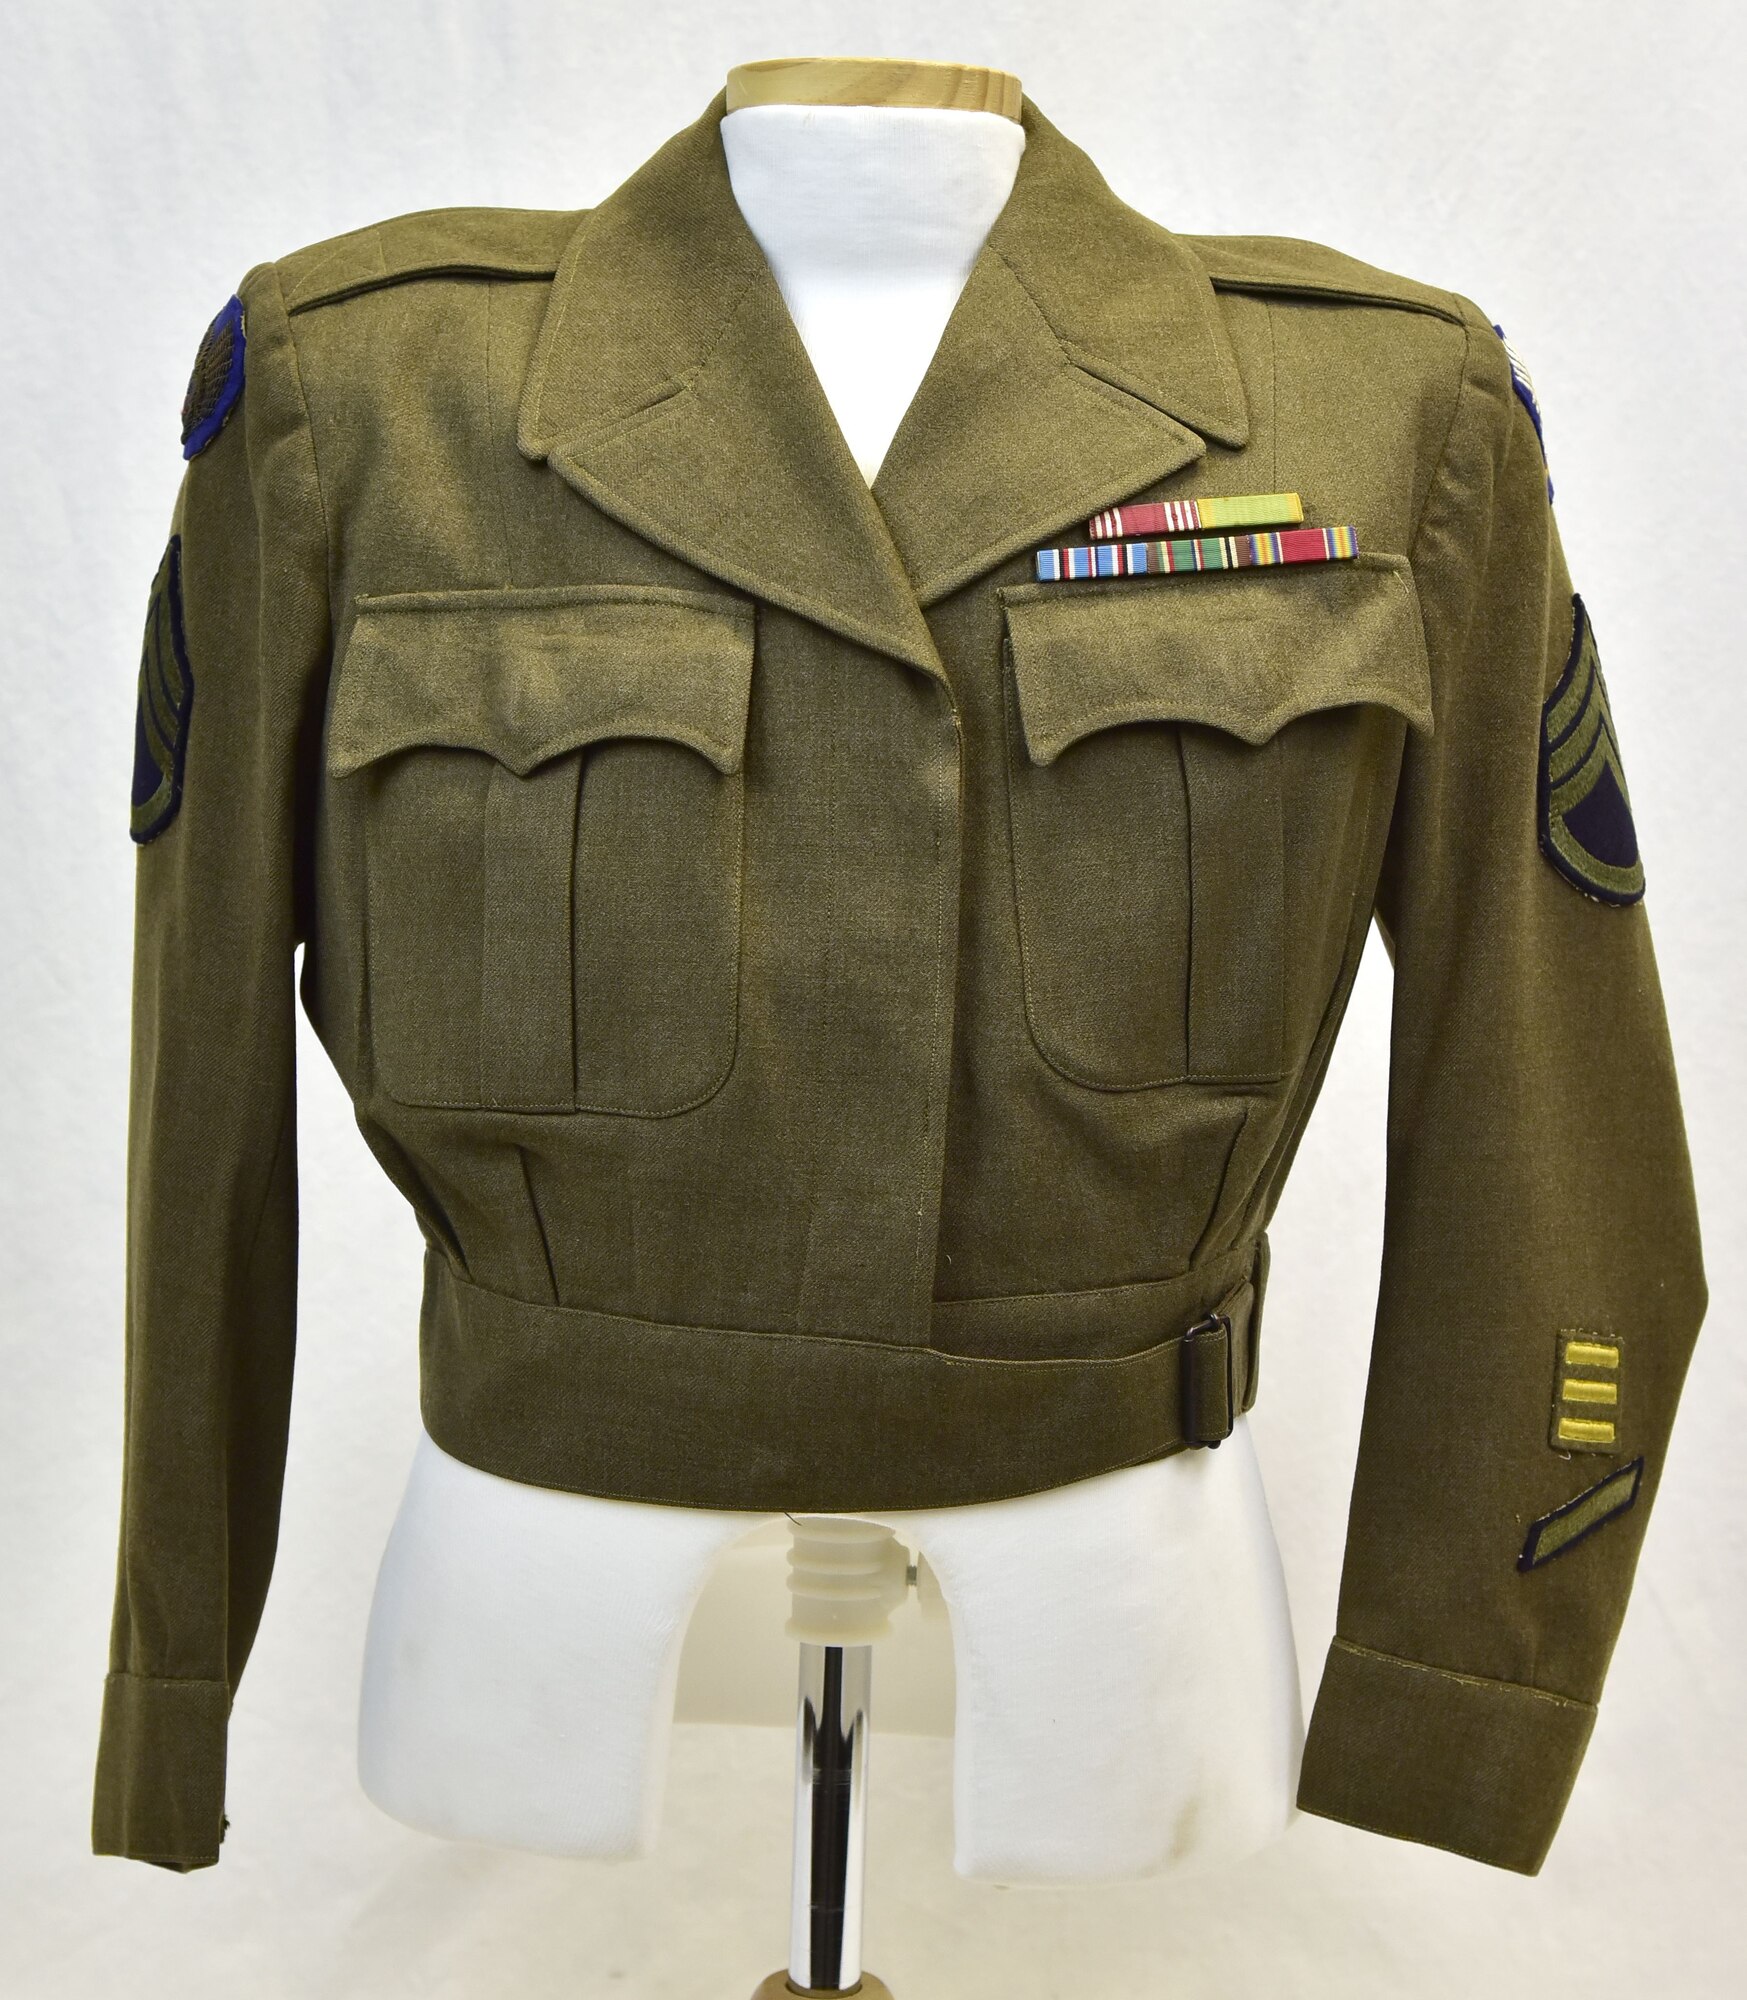 Plans call for this artifact to be displayed near the B-17F Memphis Belle™ as part of the new strategic bombardment exhibit in the WWII Gallery, which opens to the public on May 17, 2018. Coat worn by SSgt Theresa Kobuszewski, who served in the Women’s Army Corps in the Eighth and Ninth Air Forces in England during WWII.